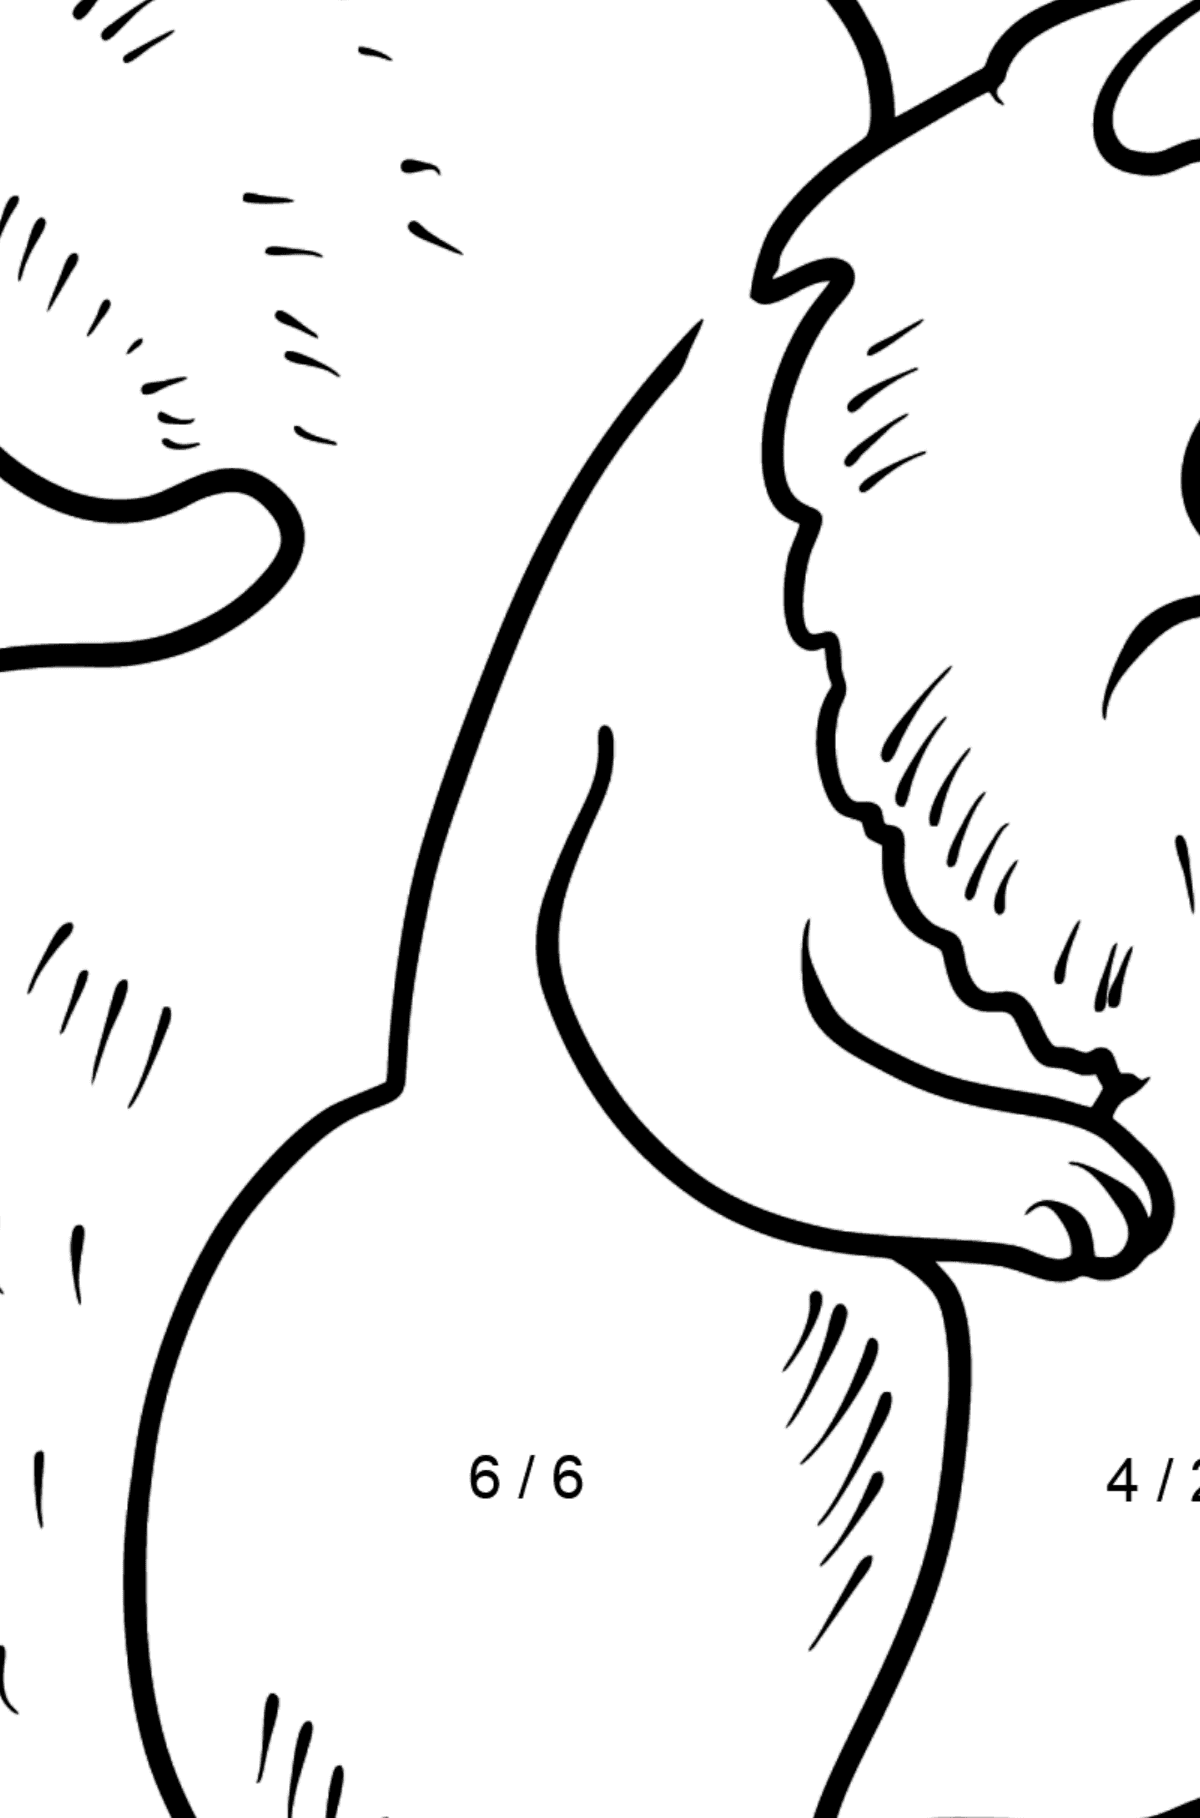 Squirrel coloring page - Math Coloring - Division for Kids